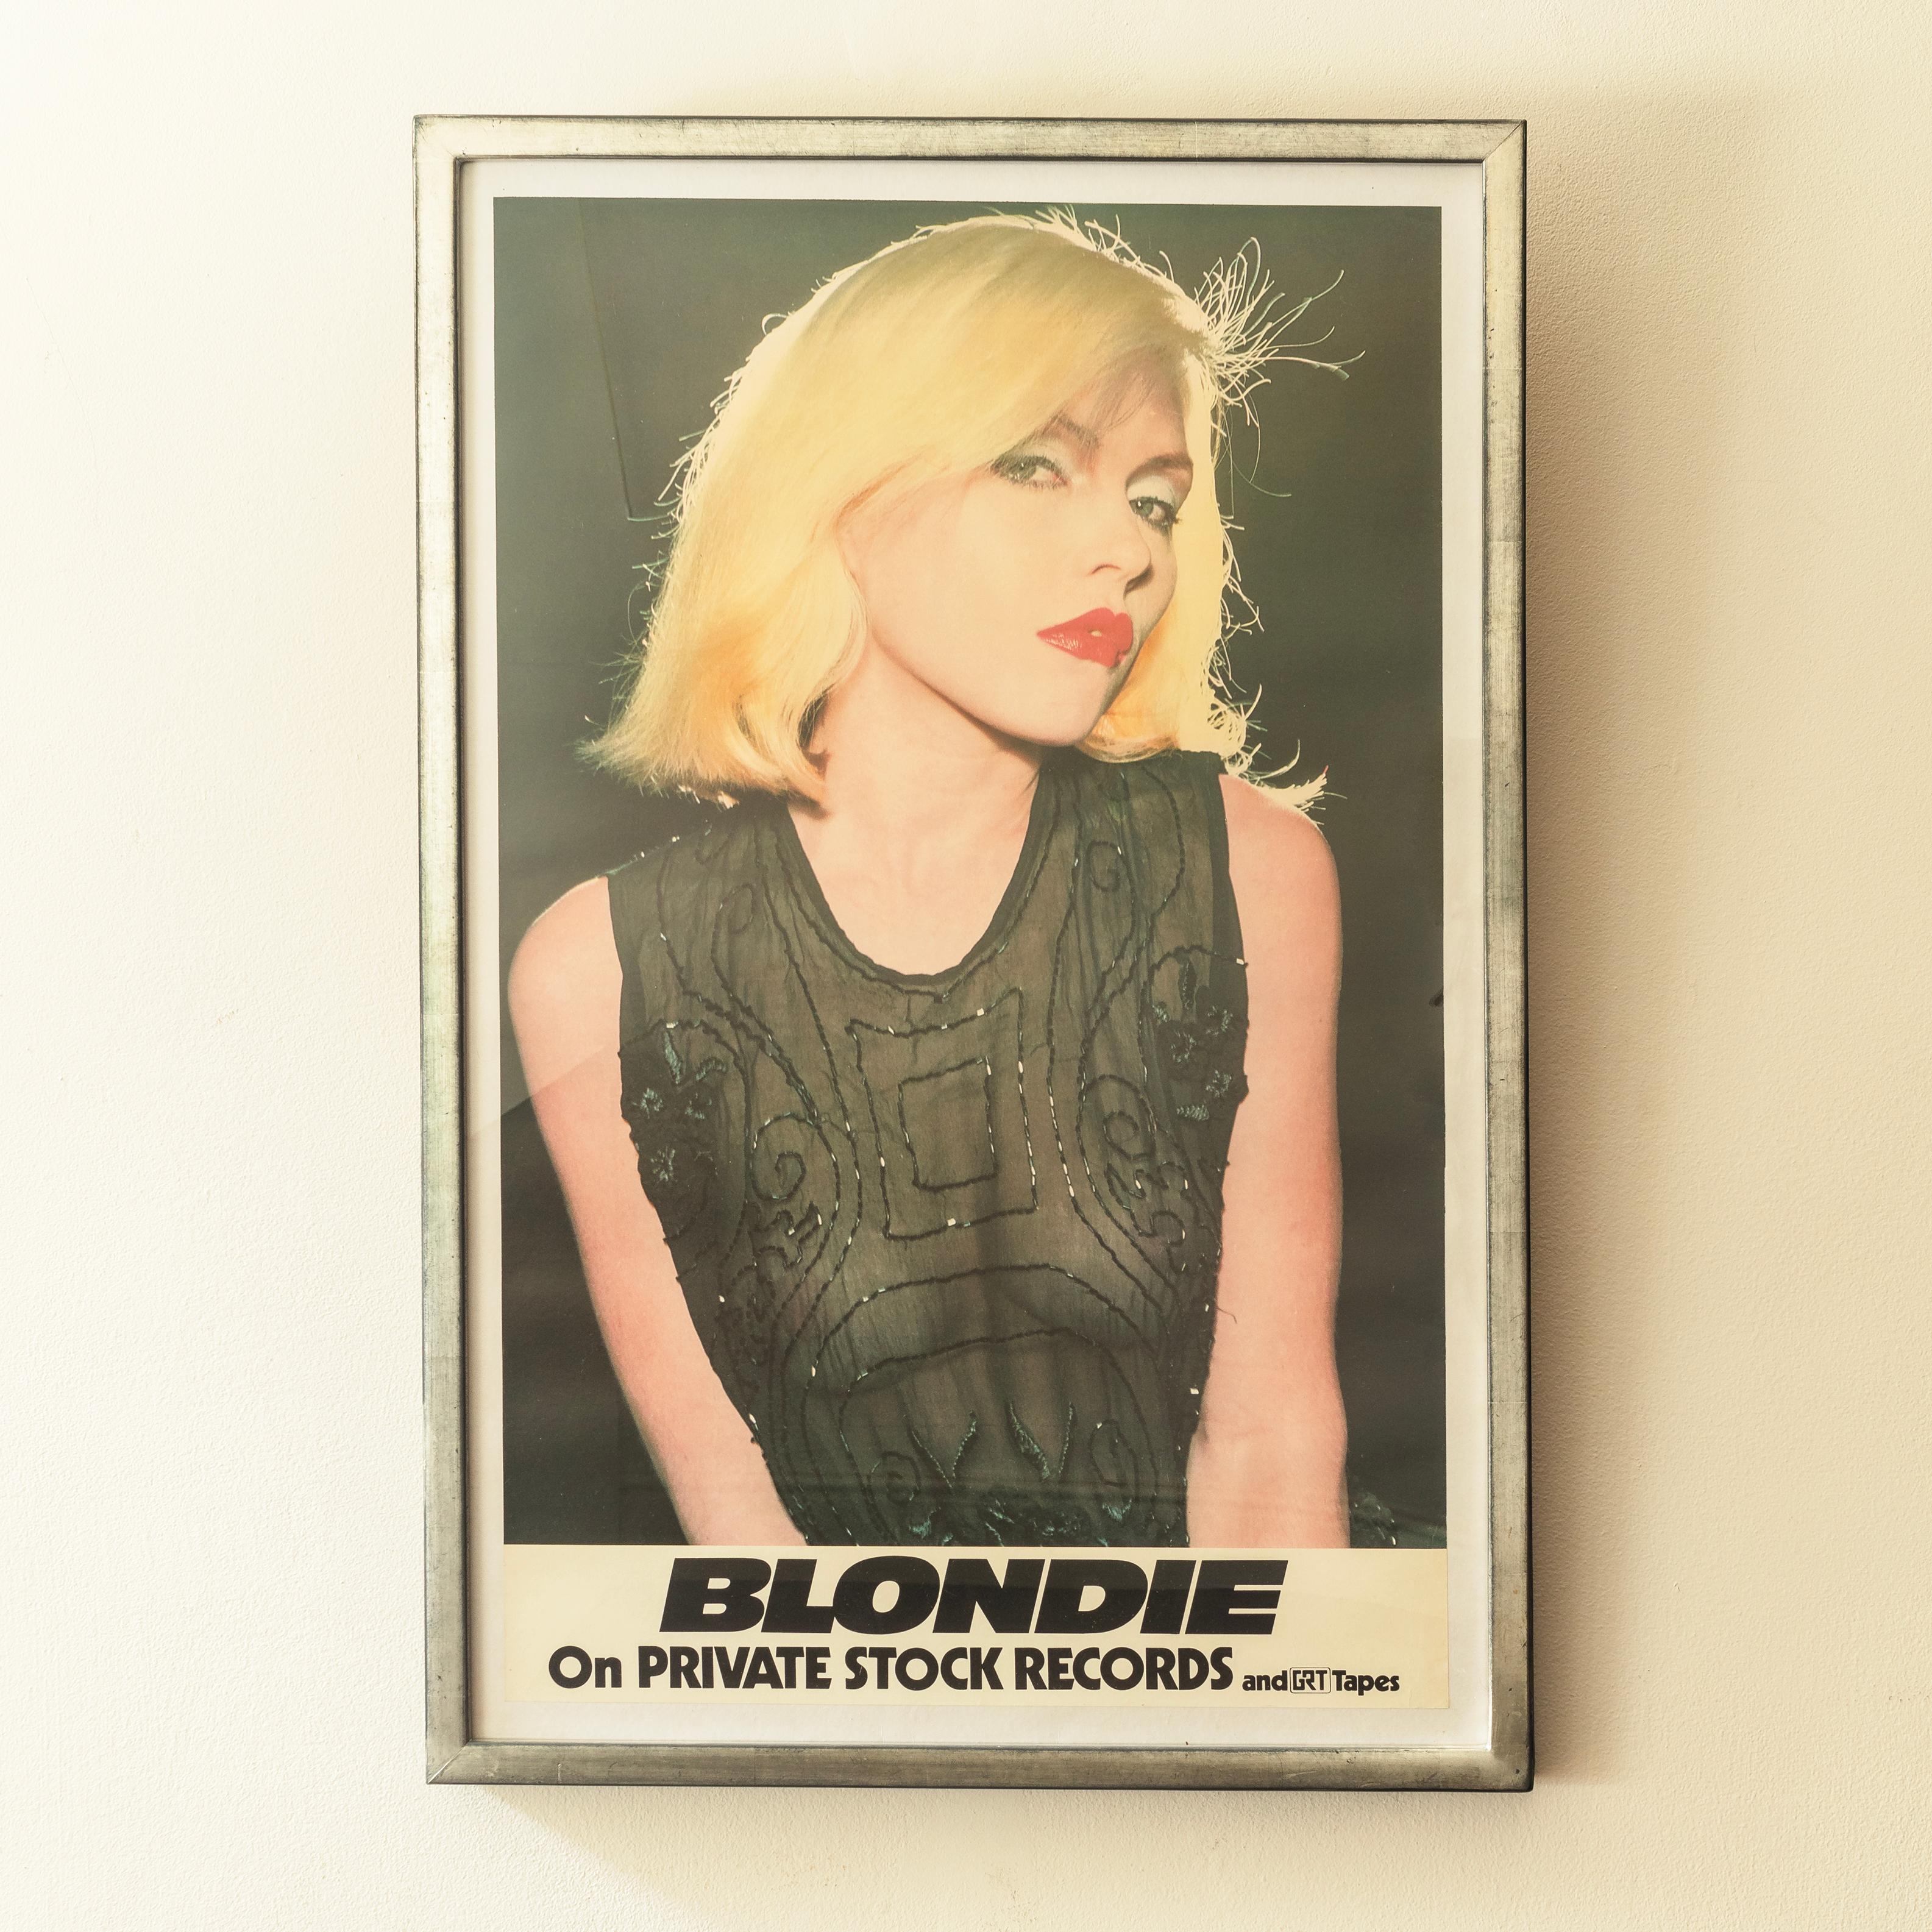 A rare poster of Debbie Harry. Reportedly Debbie Harry was livid when Private Stock printed a promotional poster featuring her in a see-through blouse, the poster was withdrawn from circulation, “It’s not selling us in the right way”, resulting in